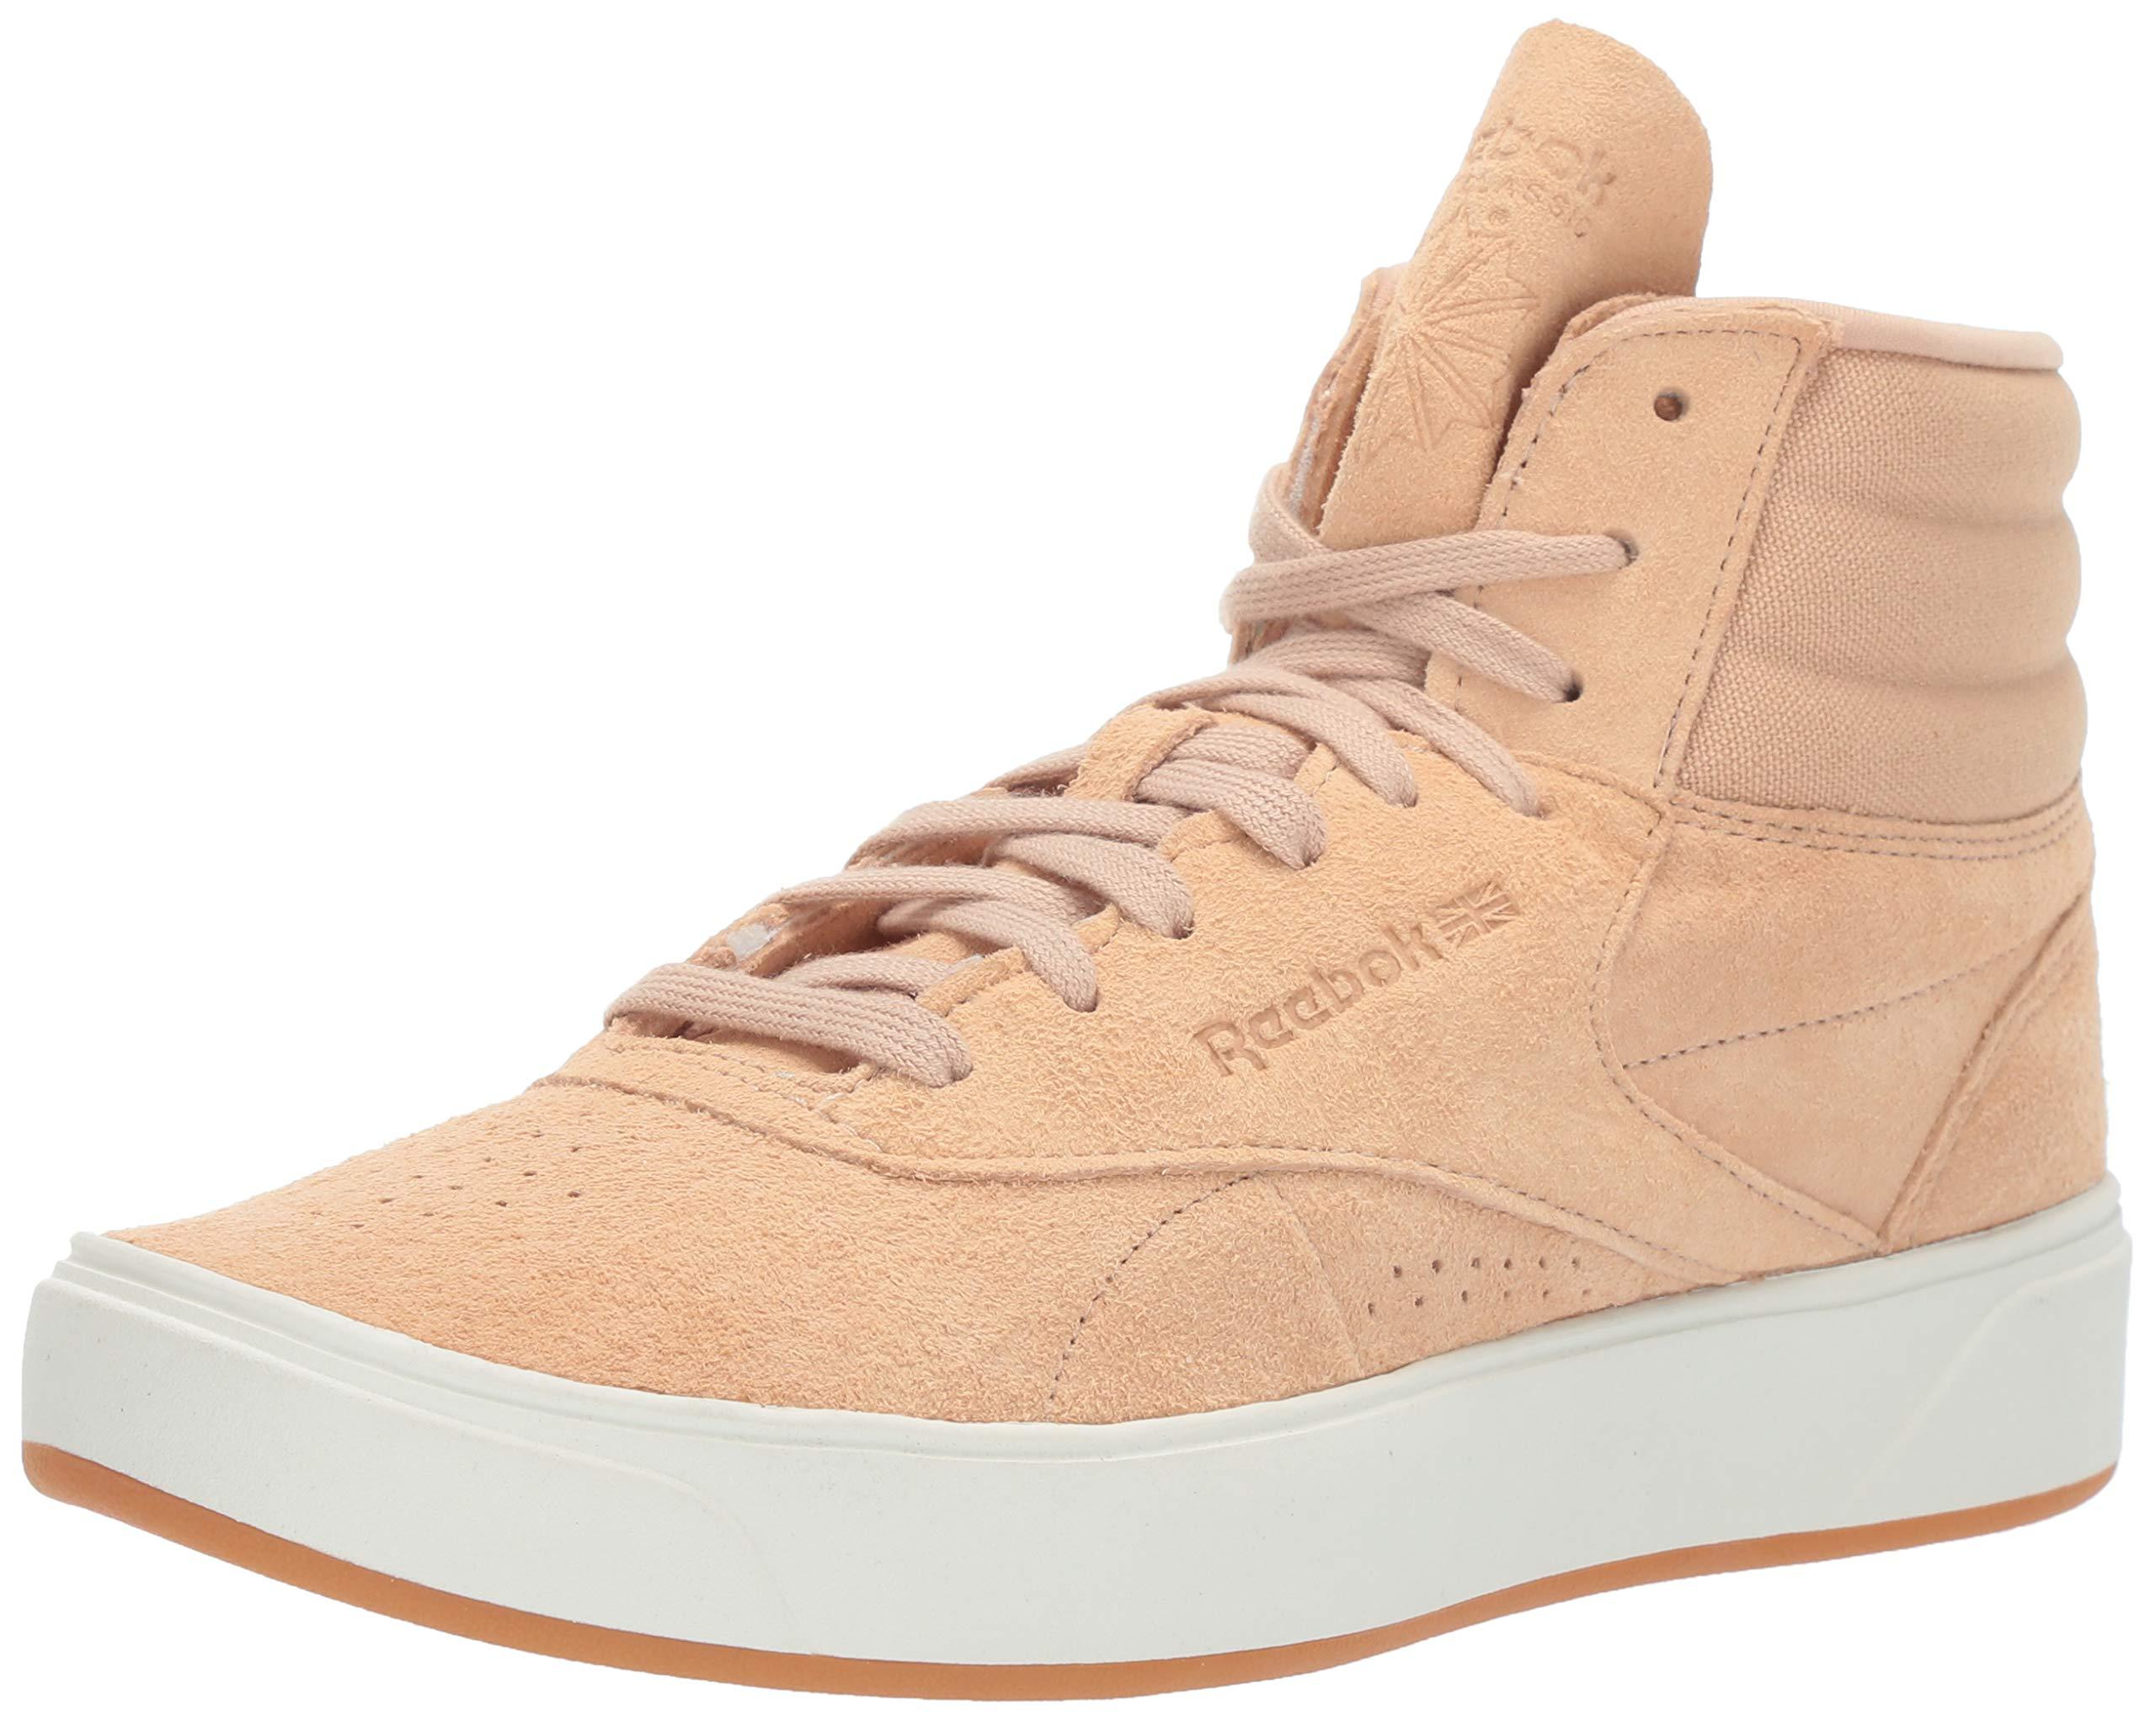 Reebok Freestyle Hi Training Shoes in Natural - Save 53% - Lyst